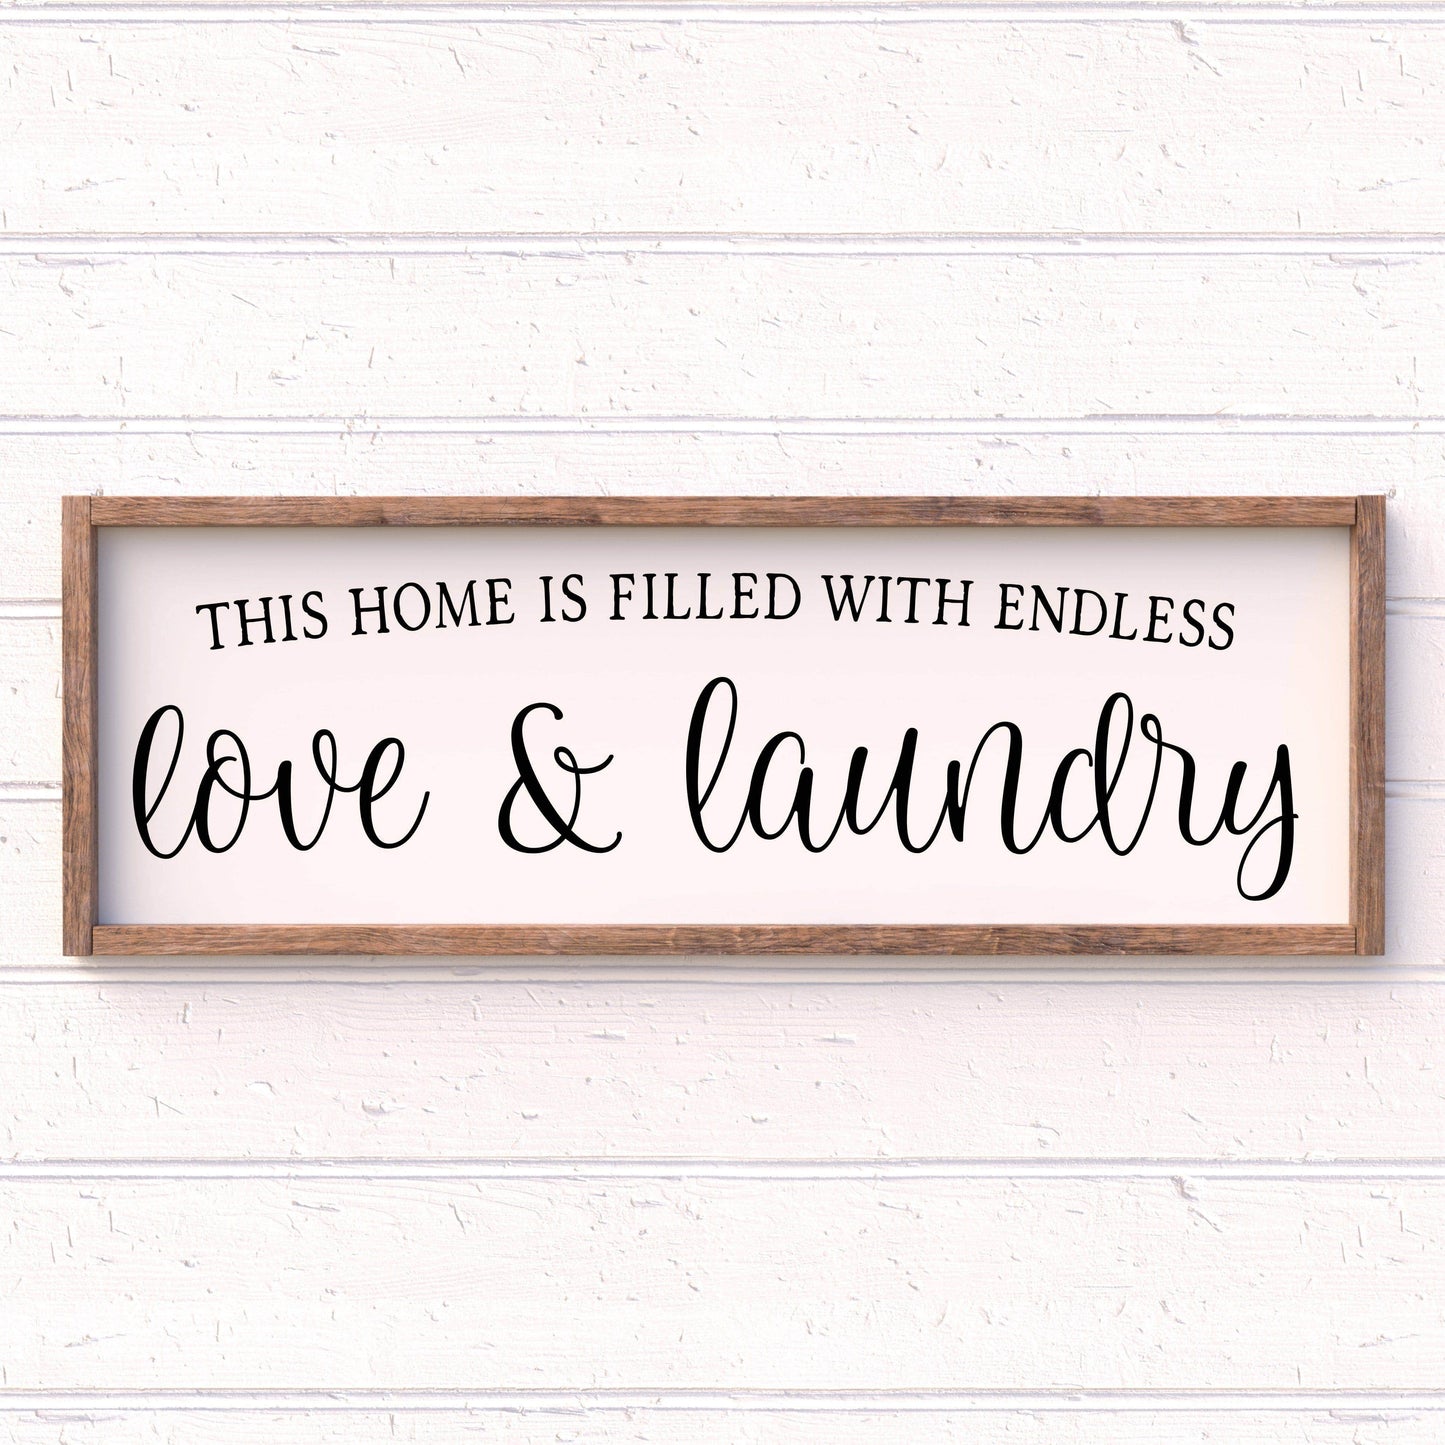 Filled with endless love and Laundry, Framed laundry wood sign, laundry decor, home decor